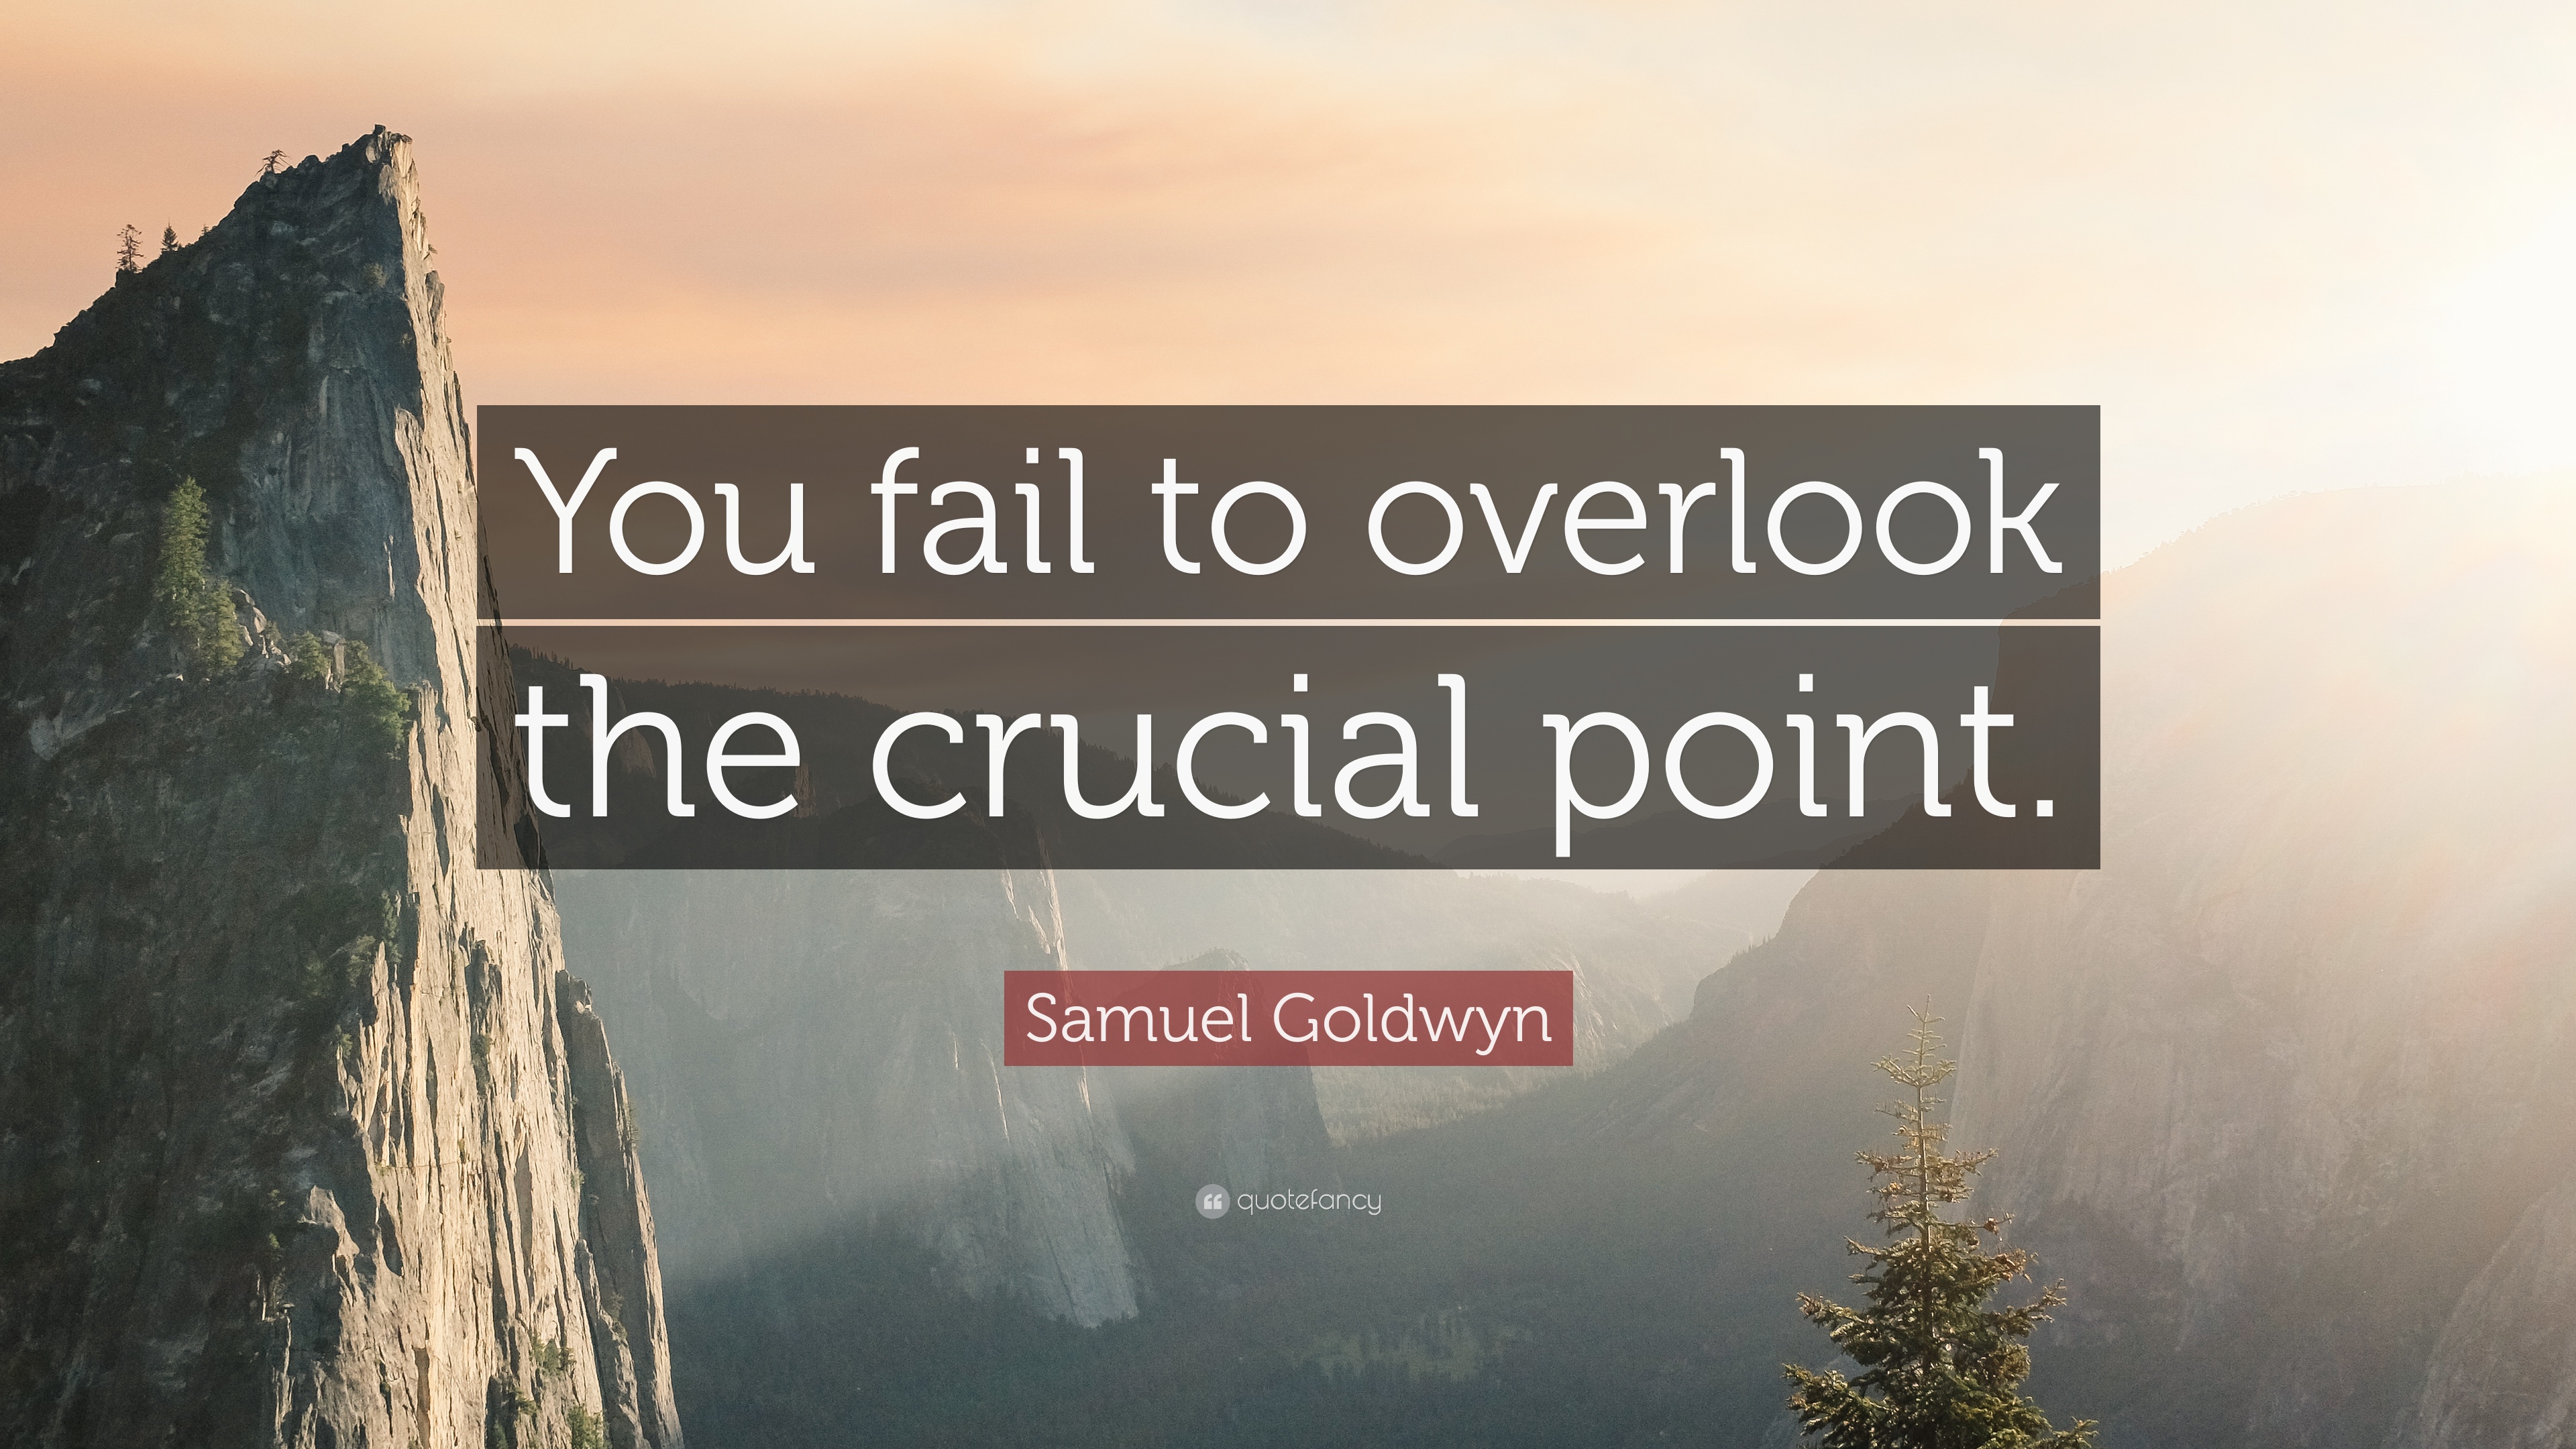 Samuel Goldwyn Quote: “You fail to overlook the crucial point.” 7